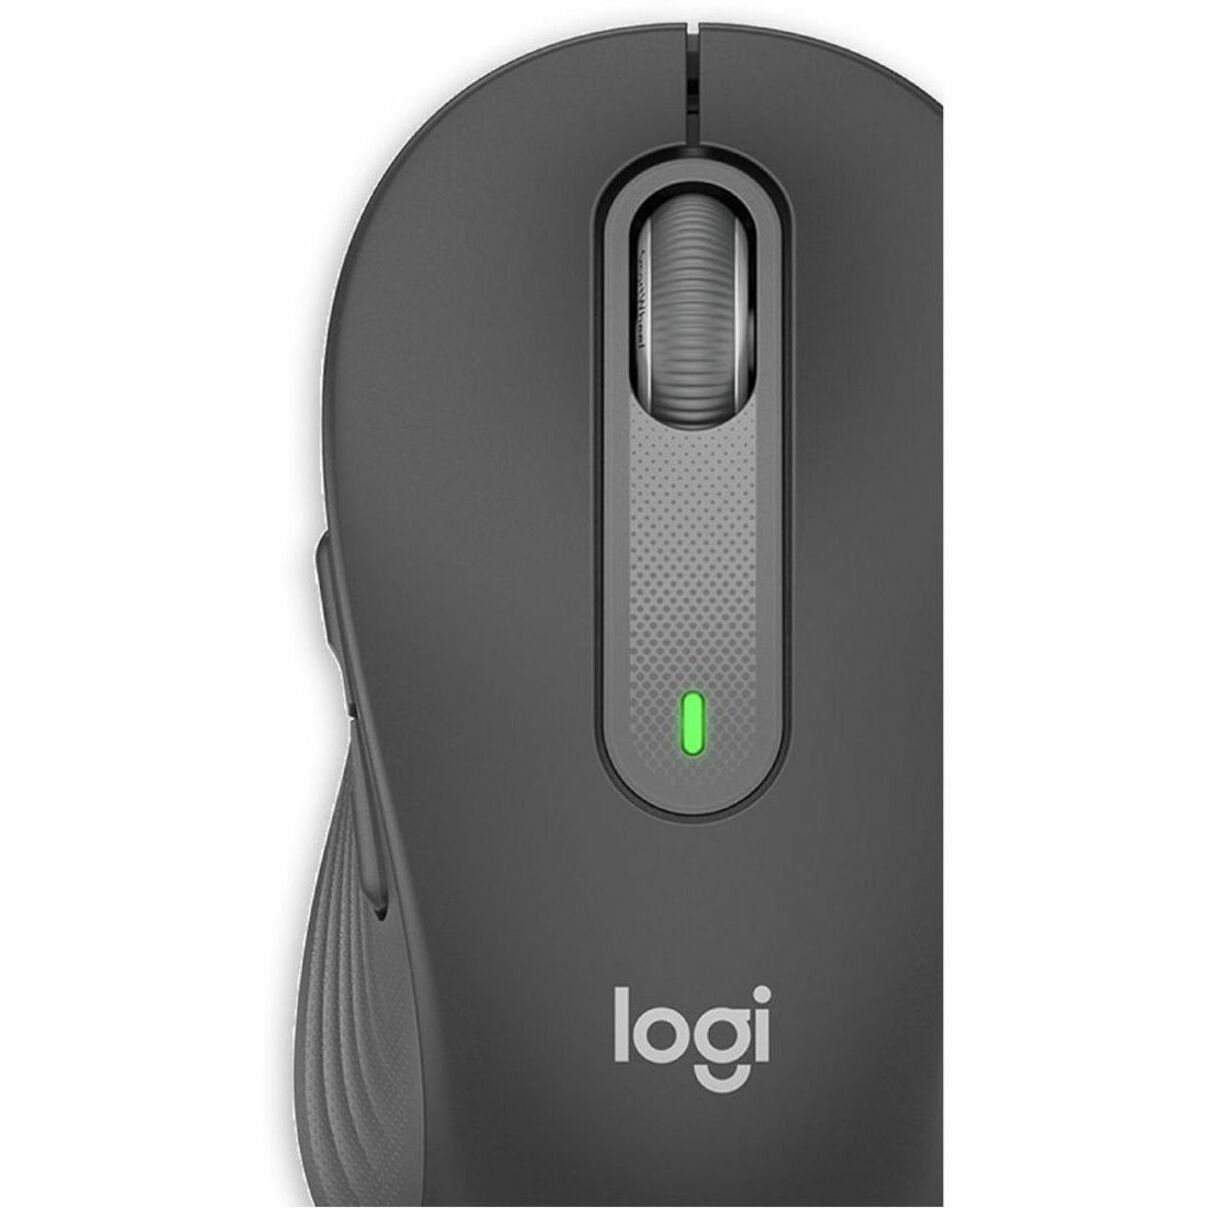 Logitech 910-006250 Signature M650 Mouse, Upgrade to Smarter Scrolling, Better Comfort, and More Productivity